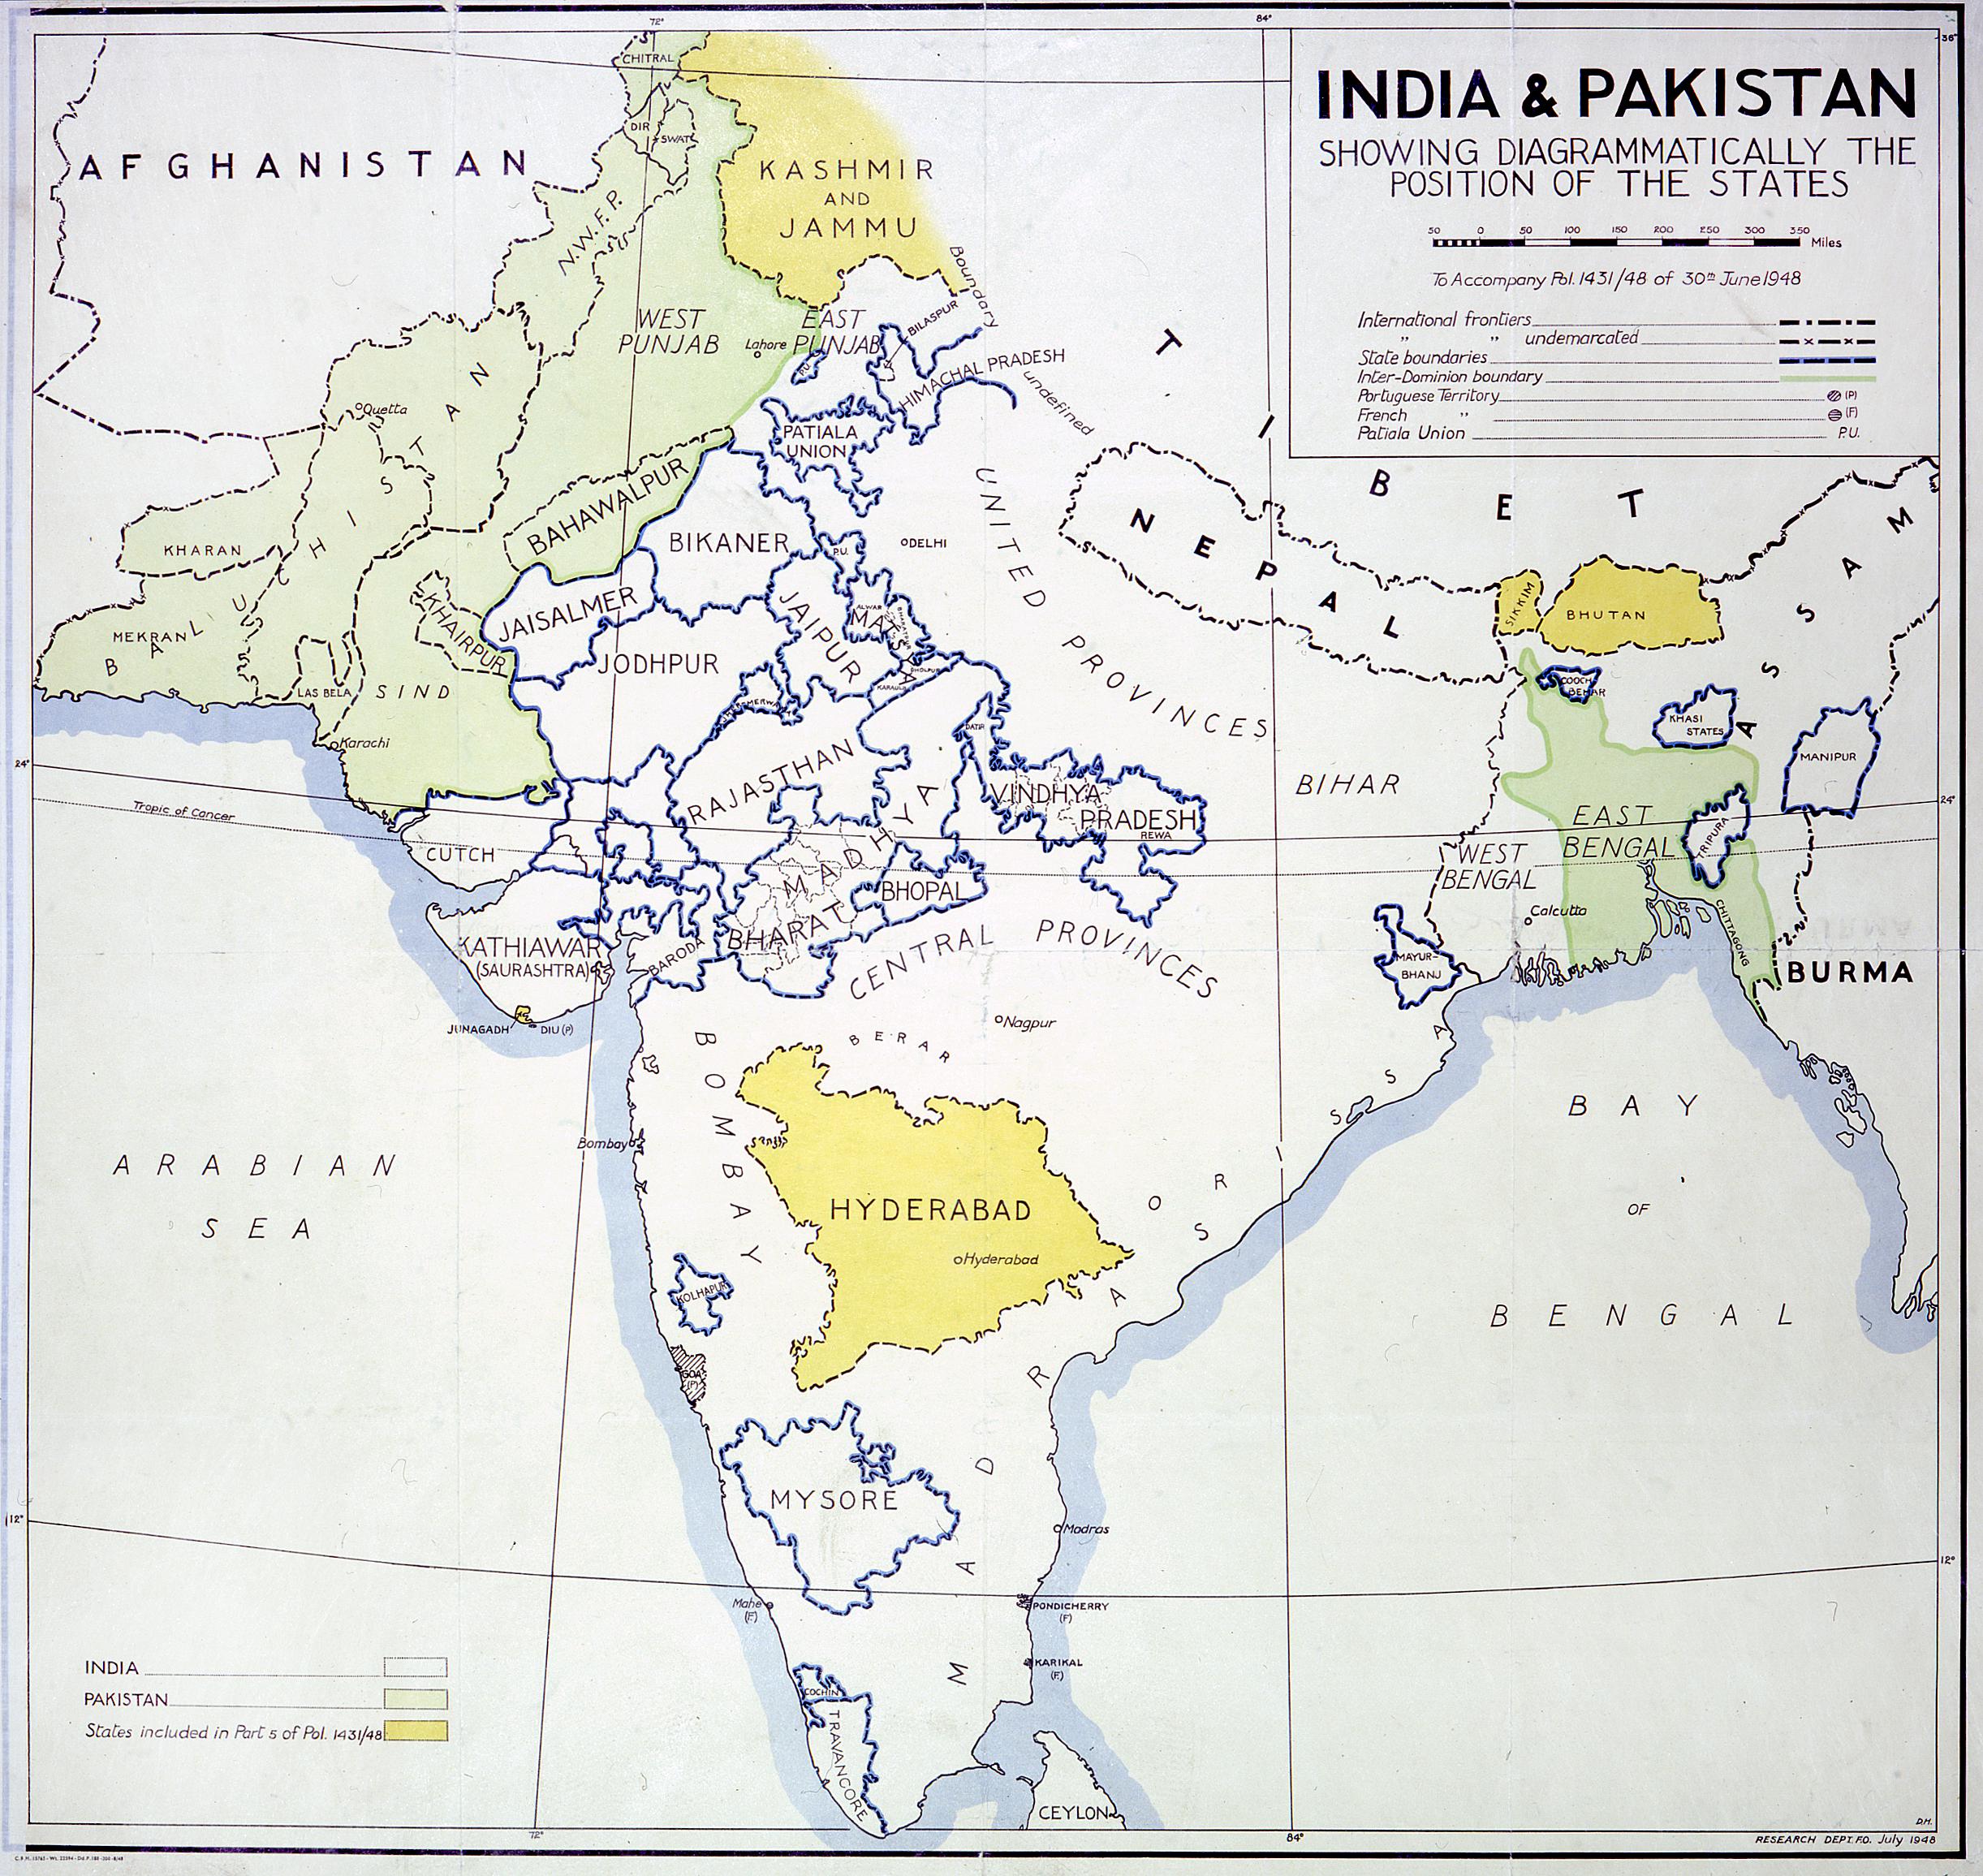 Map of present-day India, Pakistan, and Bangladesh. Most of the map is in white, except for the regions of Baluchistan, NWFP, West Punjab, Bahawalpur, Sind, and East Bengal, which are in green, and Kashmir and Jannu, Hyderabad, Sikkim, and Bhutan, which are in yellow.